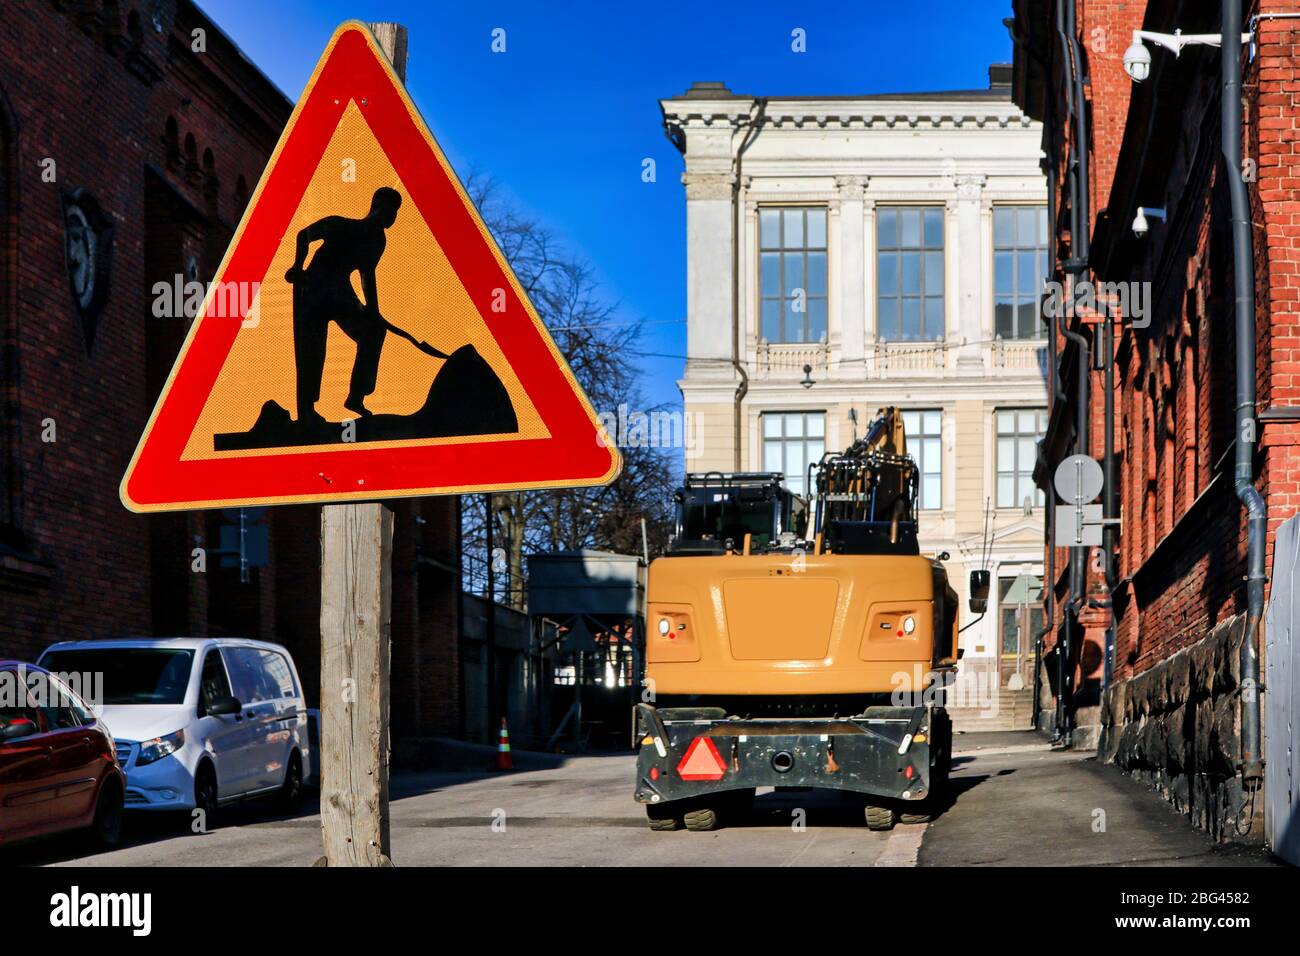 Road works traffic sign by city street on a sunny day with yellow hydraulic excavator on the background. No people, branding removed from image. Stock Photo